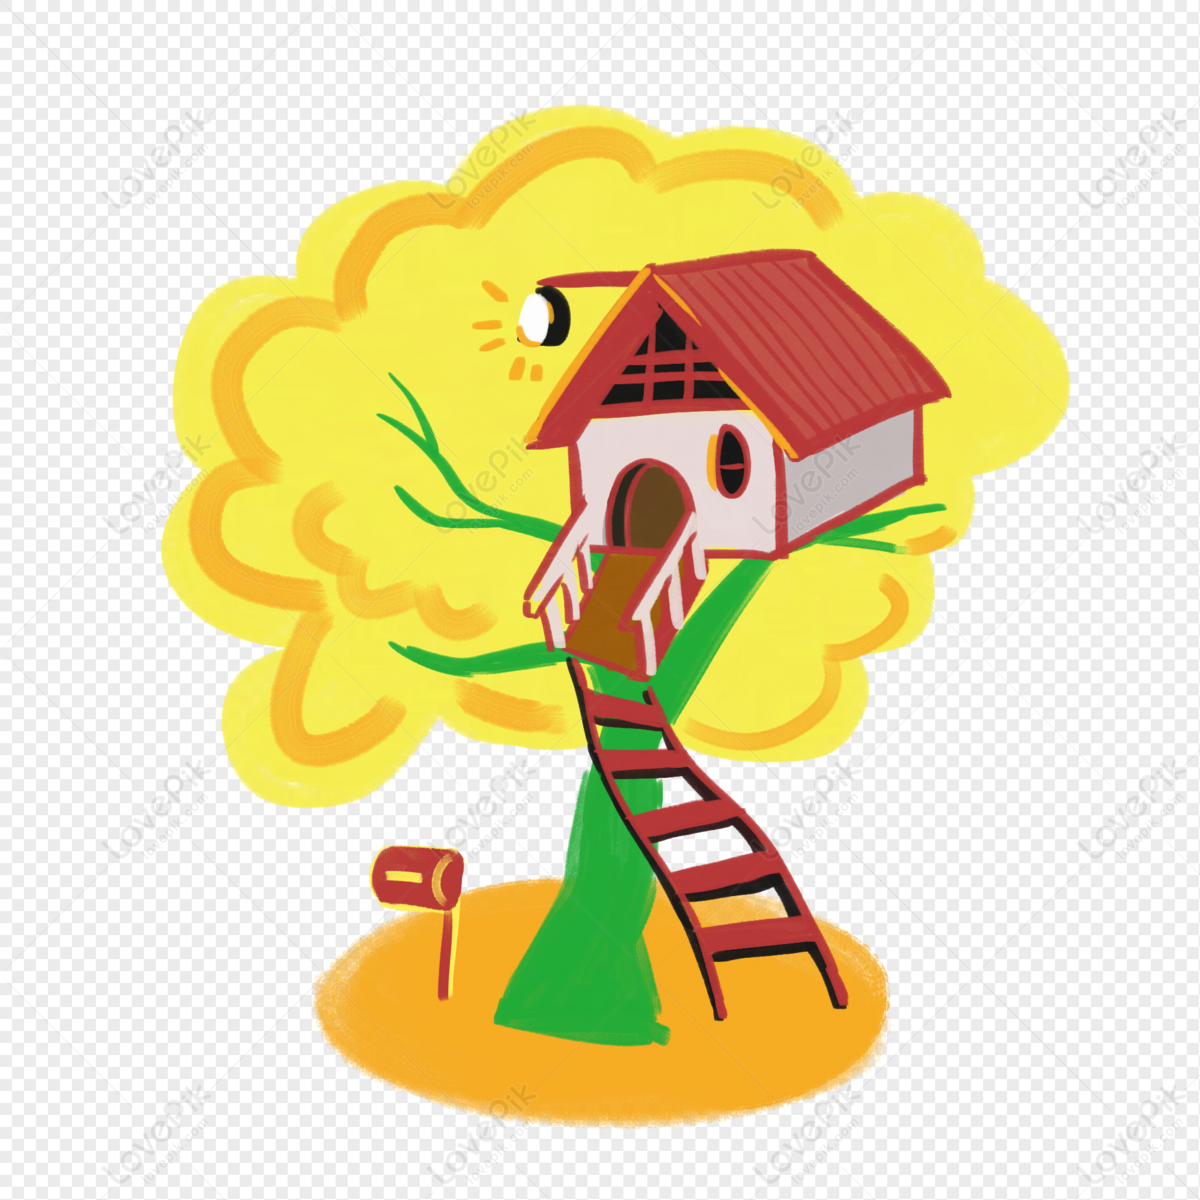 Cartoon Pretty Tree House PNG White Transparent And Clipart Image For Free  Download - Lovepik | 401549662